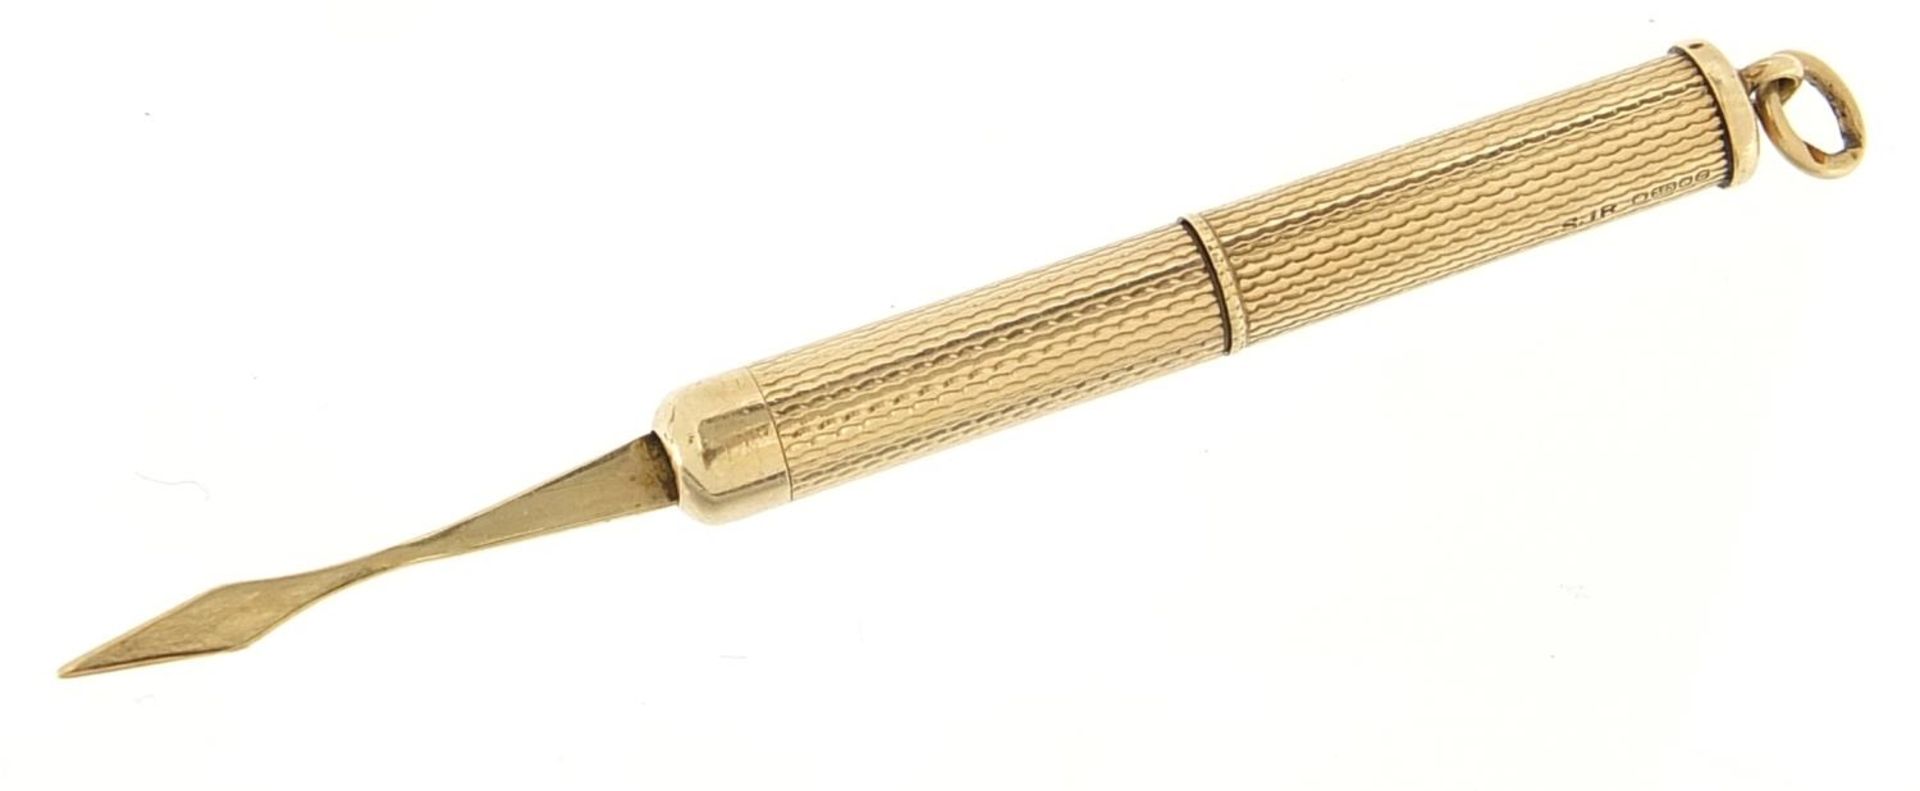 9ct gold propelling toothpick with engine turned decoration, 5.0cm in length un-extended, 6.6g